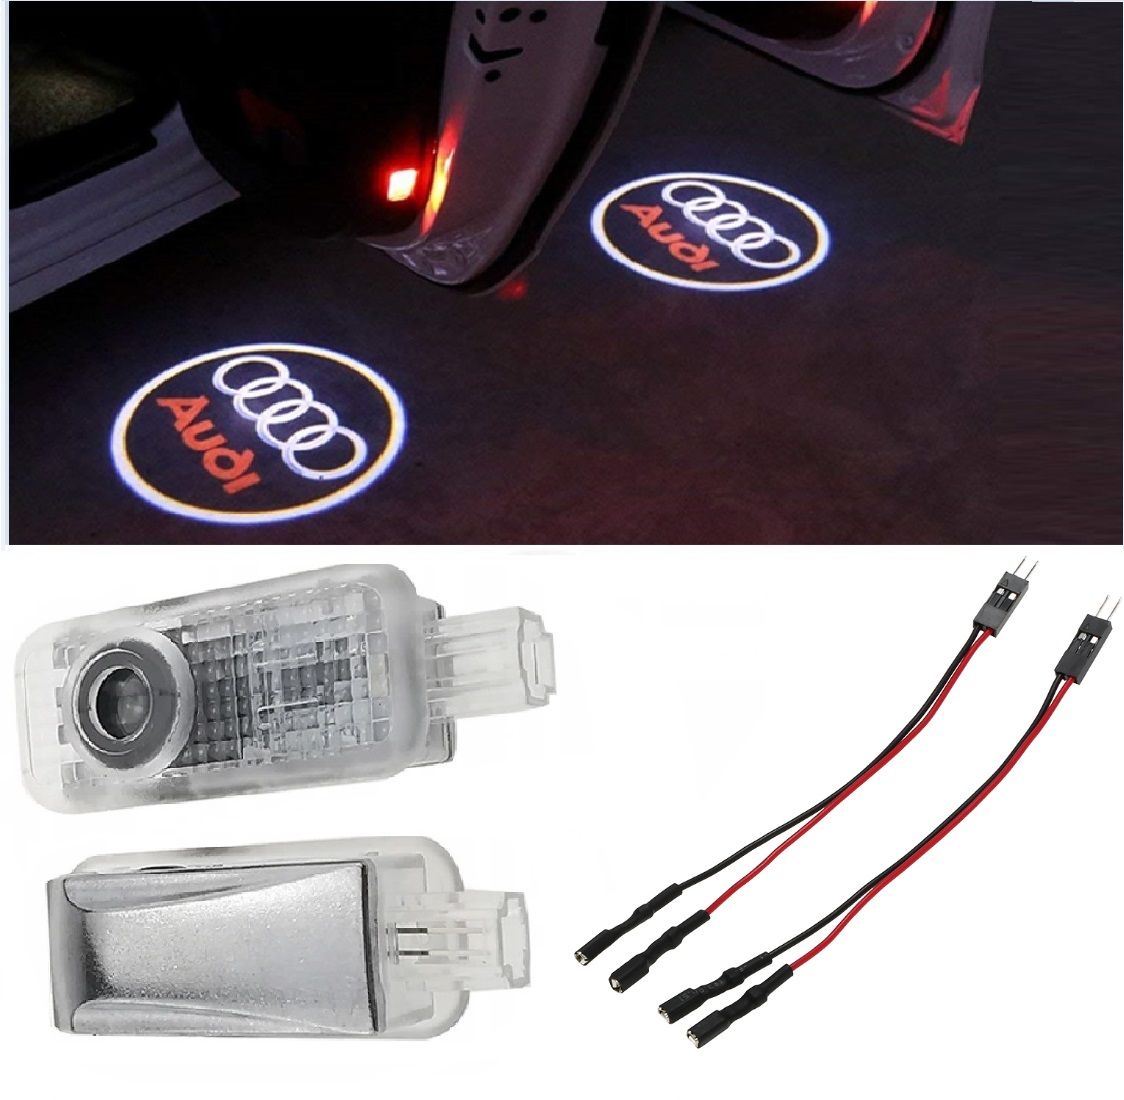 2 LIGHTING DOOR Lights Eclairage LED Logo For Audi A1 A3 A4 A6 A7